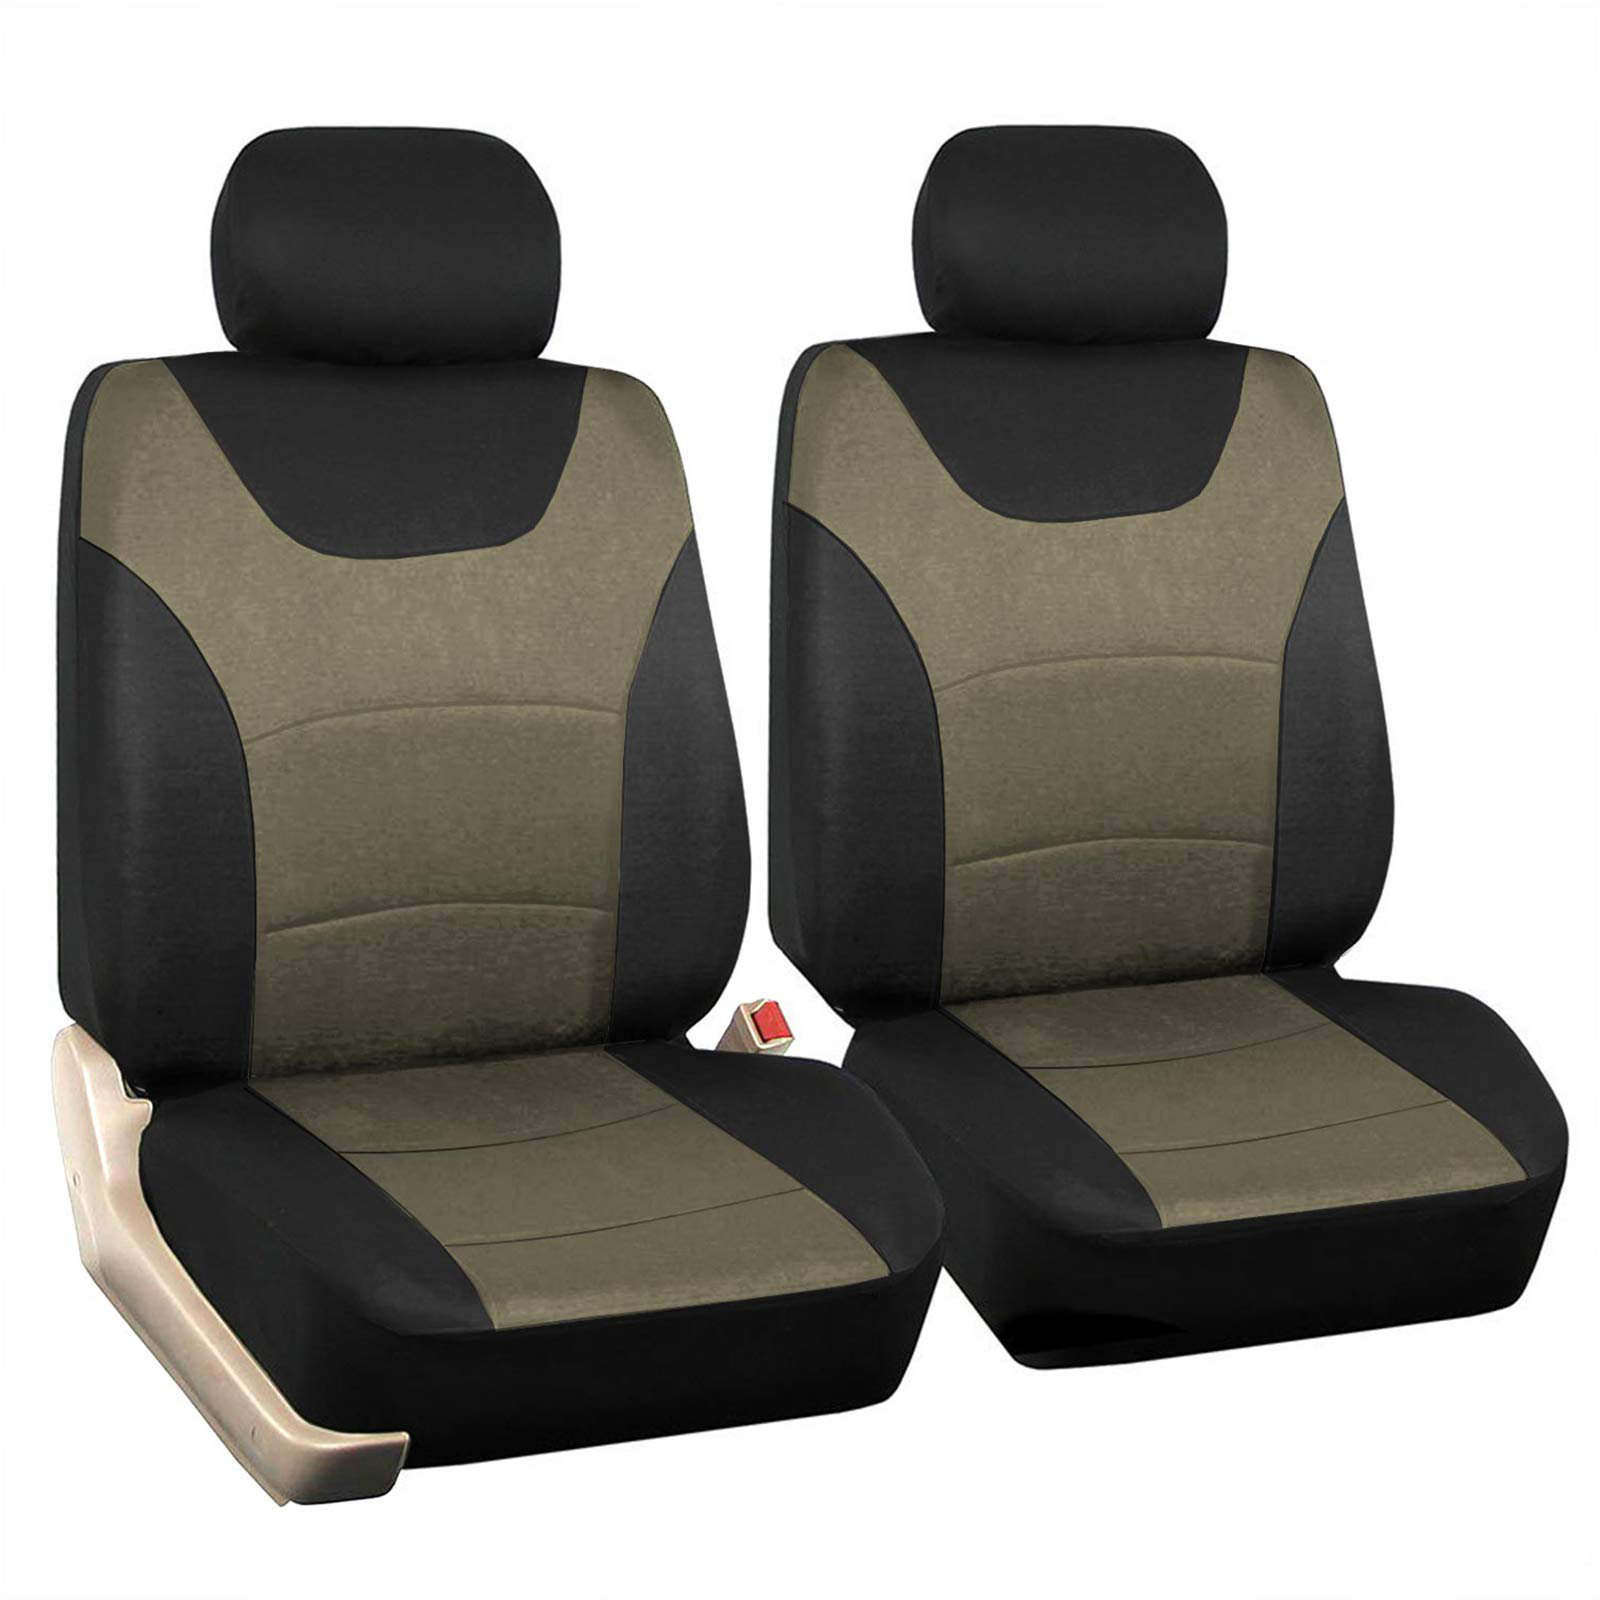 1Pair PU Leather Edge Wrapping Design Non-slip Car Front Seat Cushion Cover Grey 